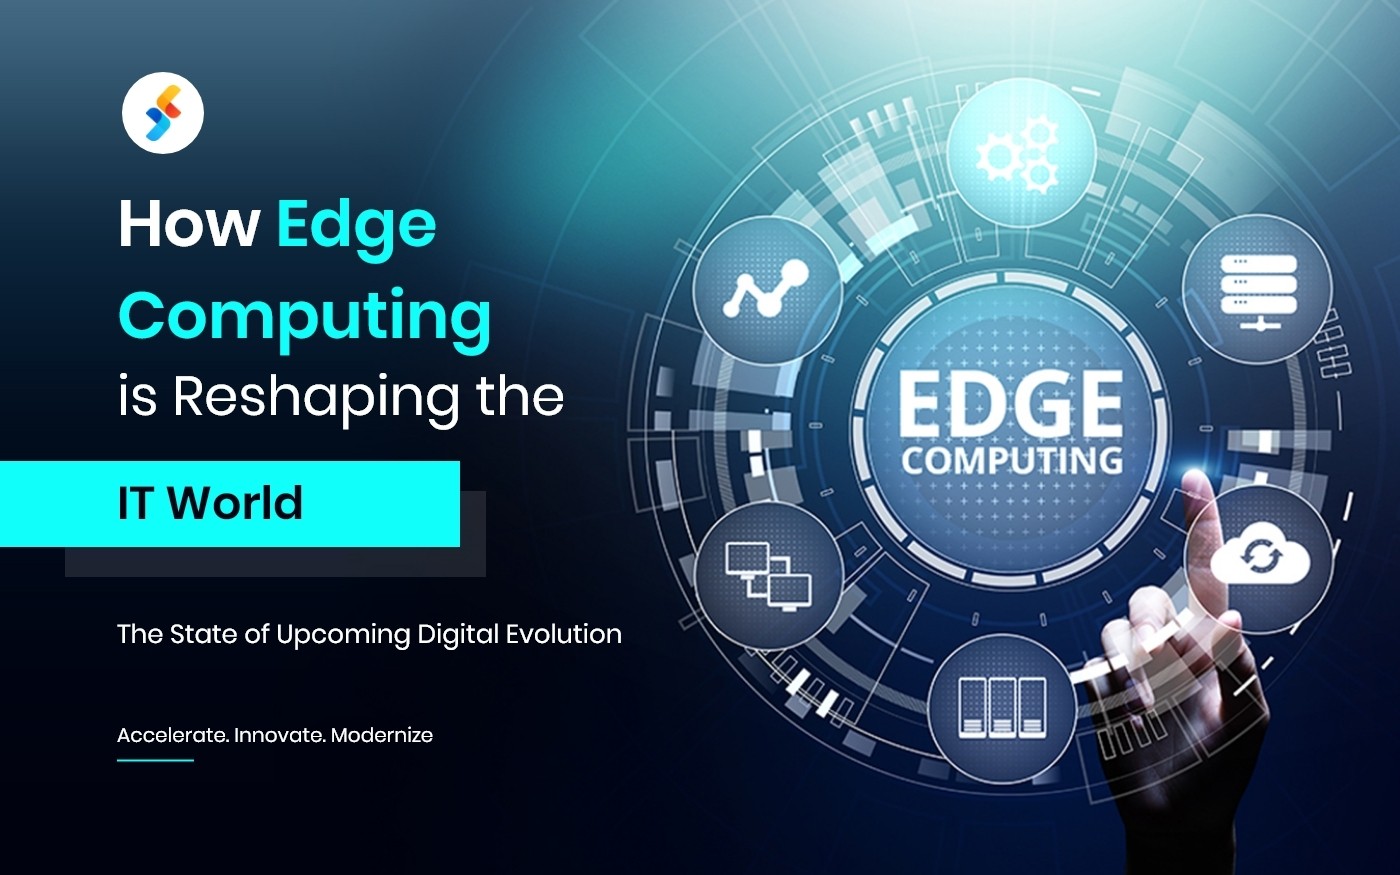 How Edge Computing is Reshaping the IT World